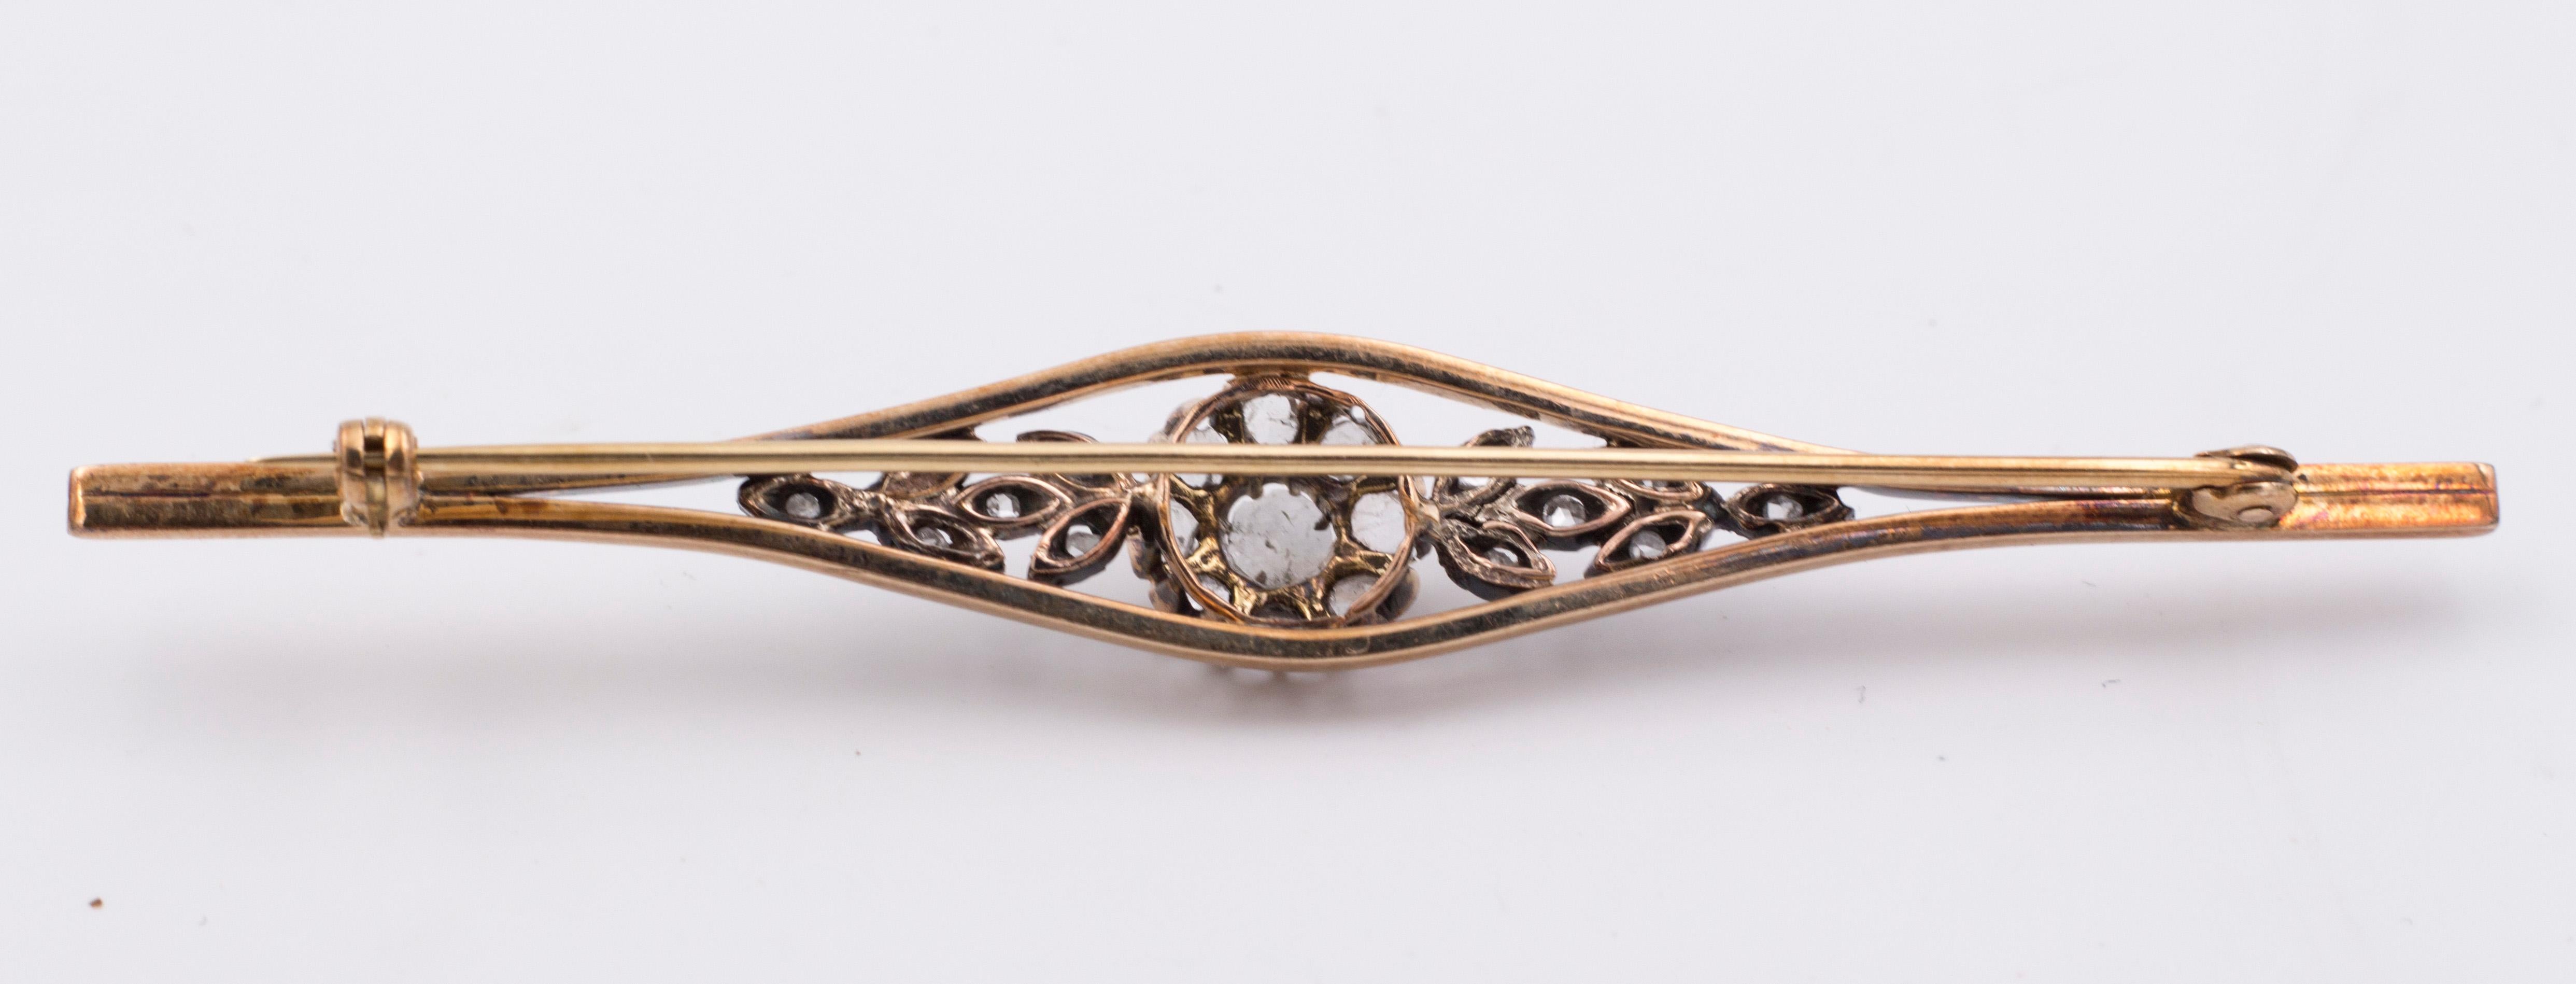 An antique brooch, dating from the early 20th Century, modelled in 18K gold throughout; the brooch features a beautiful floral central decoration, set with rose cut diamonds. 

MATERIALS
18K gold and rose cut diamonds

DIMENSIONS
Length: 8.3